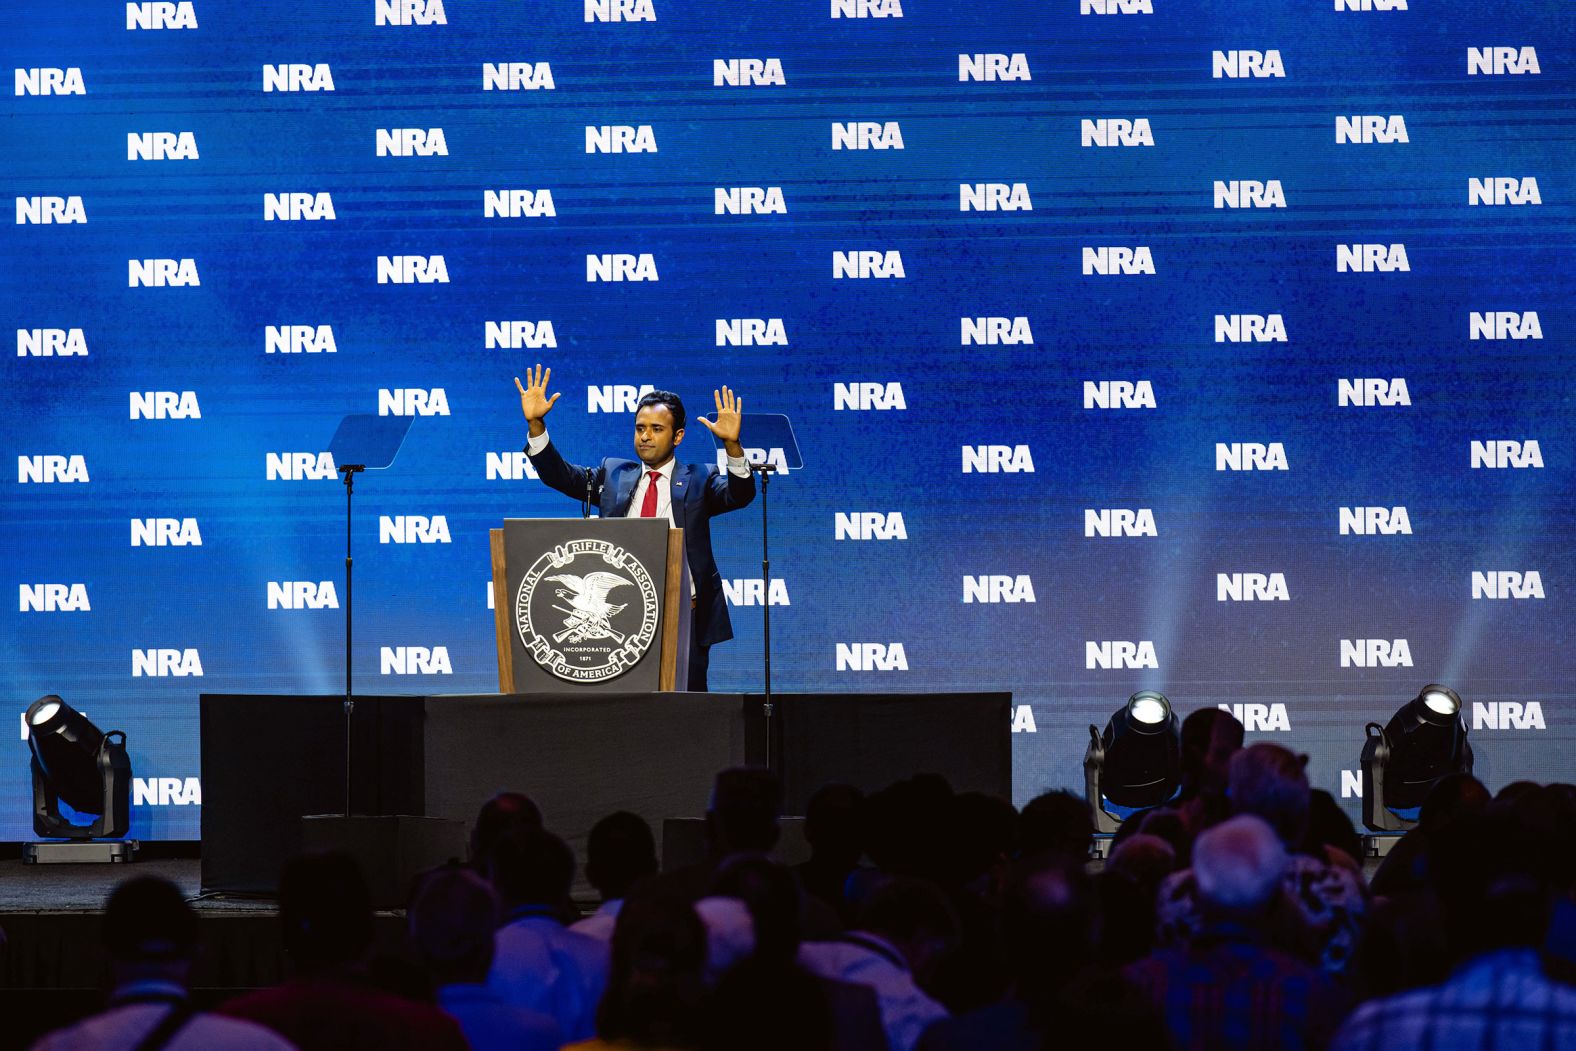 Ramaswamy speaks at the National Rifle Association's convention in Indianapolis in April 2023.